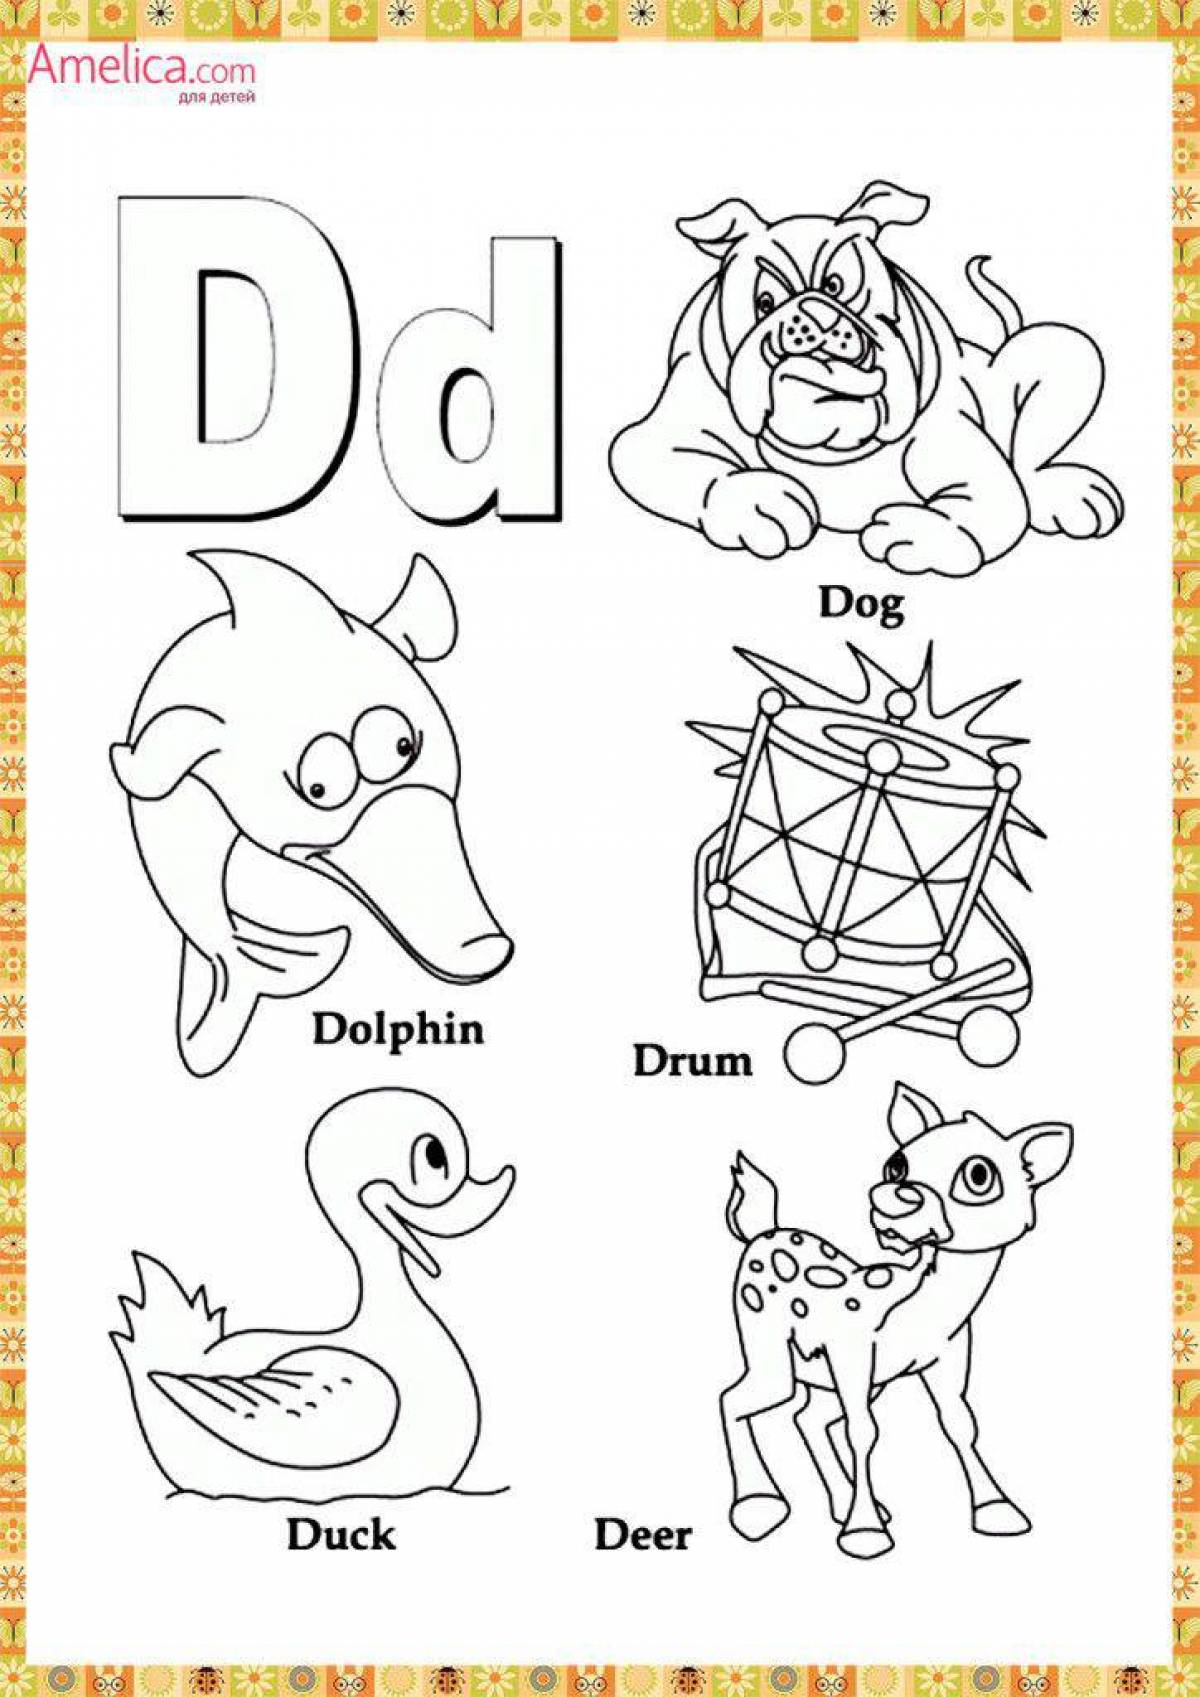 Colorful english alphabet coloring page